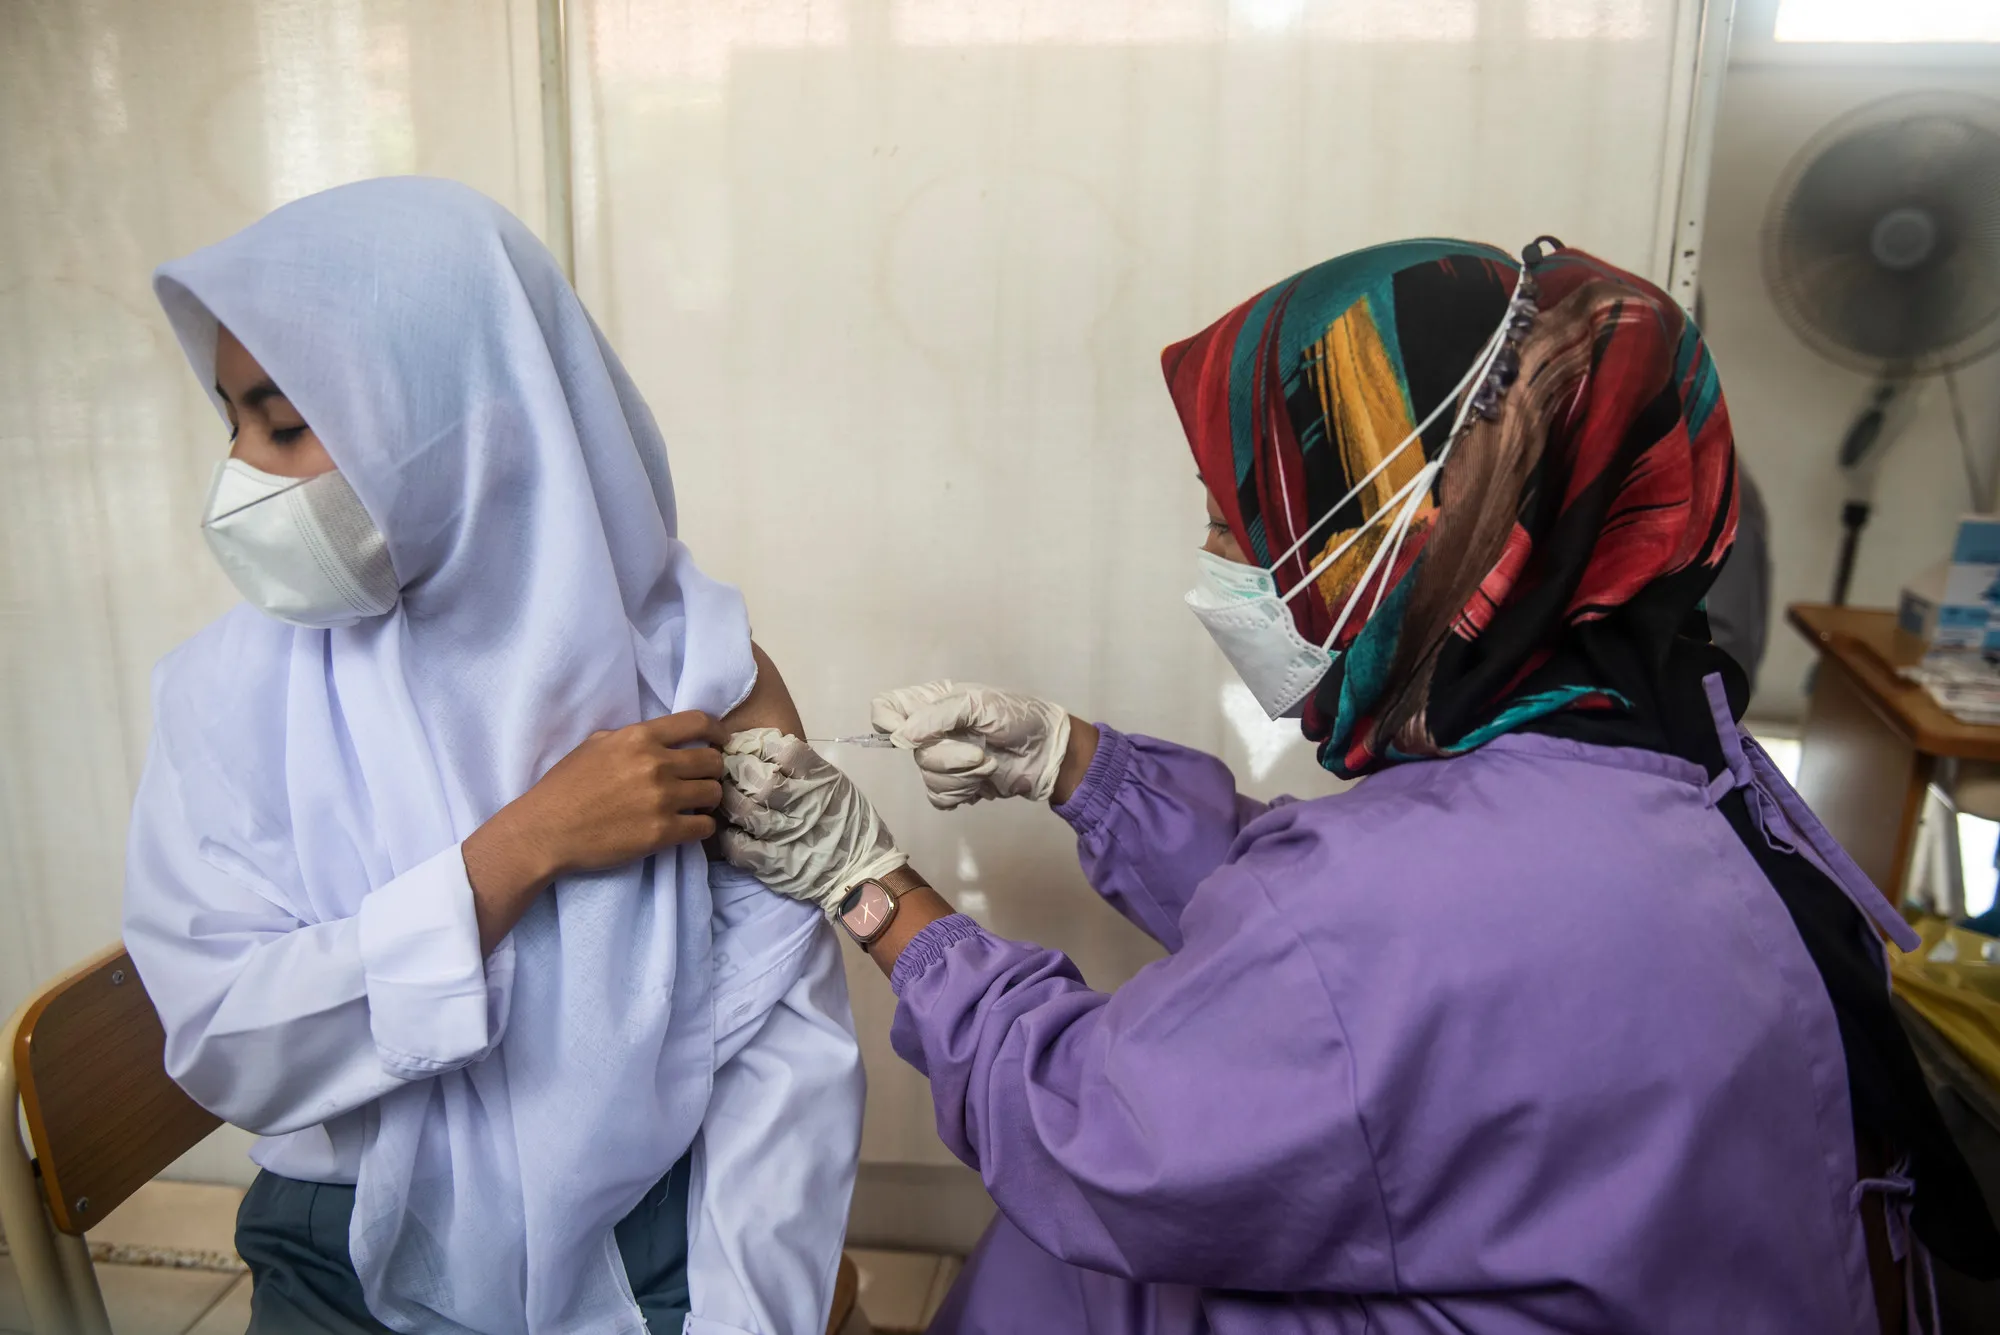 A health worker injects the vaccine to students during vaccine program in Cinangka Public High School, Serang, Banten, Indonesia, Monday, August 9th 2021. Students need to bring permission letter from their parents to get vaccinated.